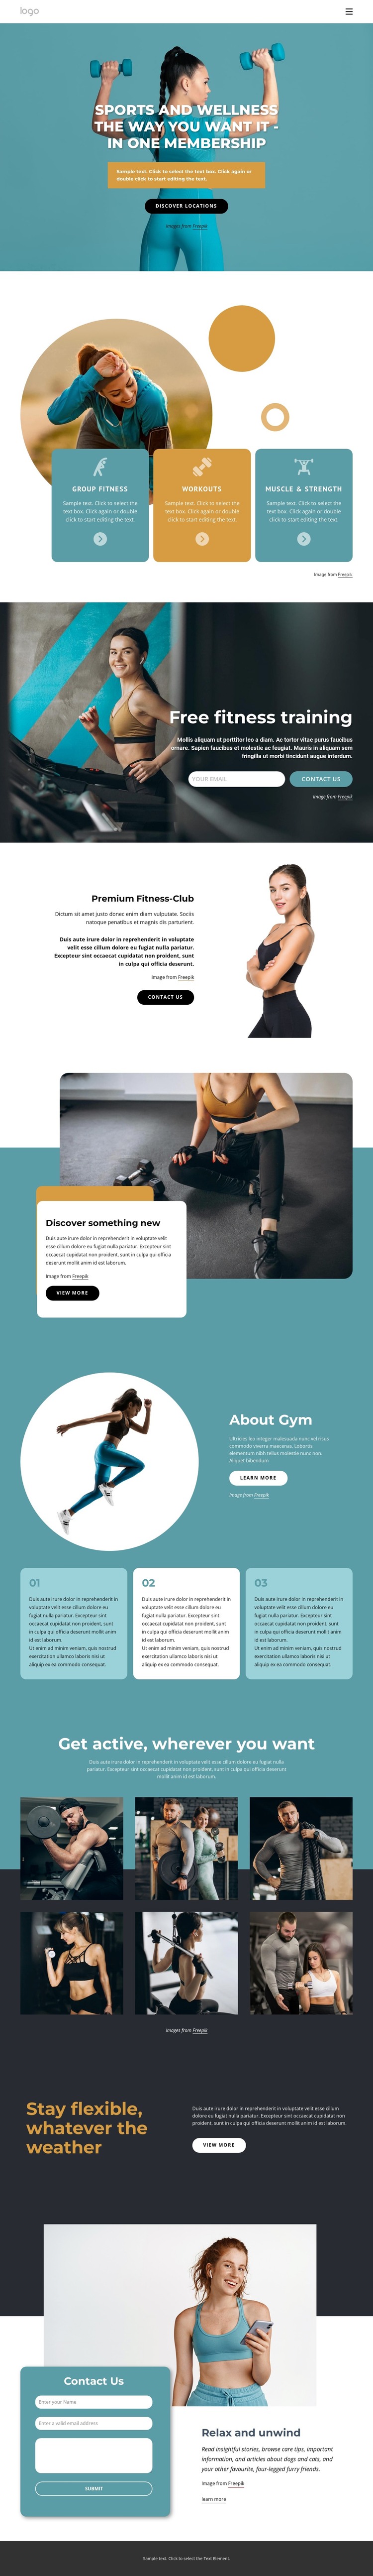 Workout anywhere with one membership Web Design